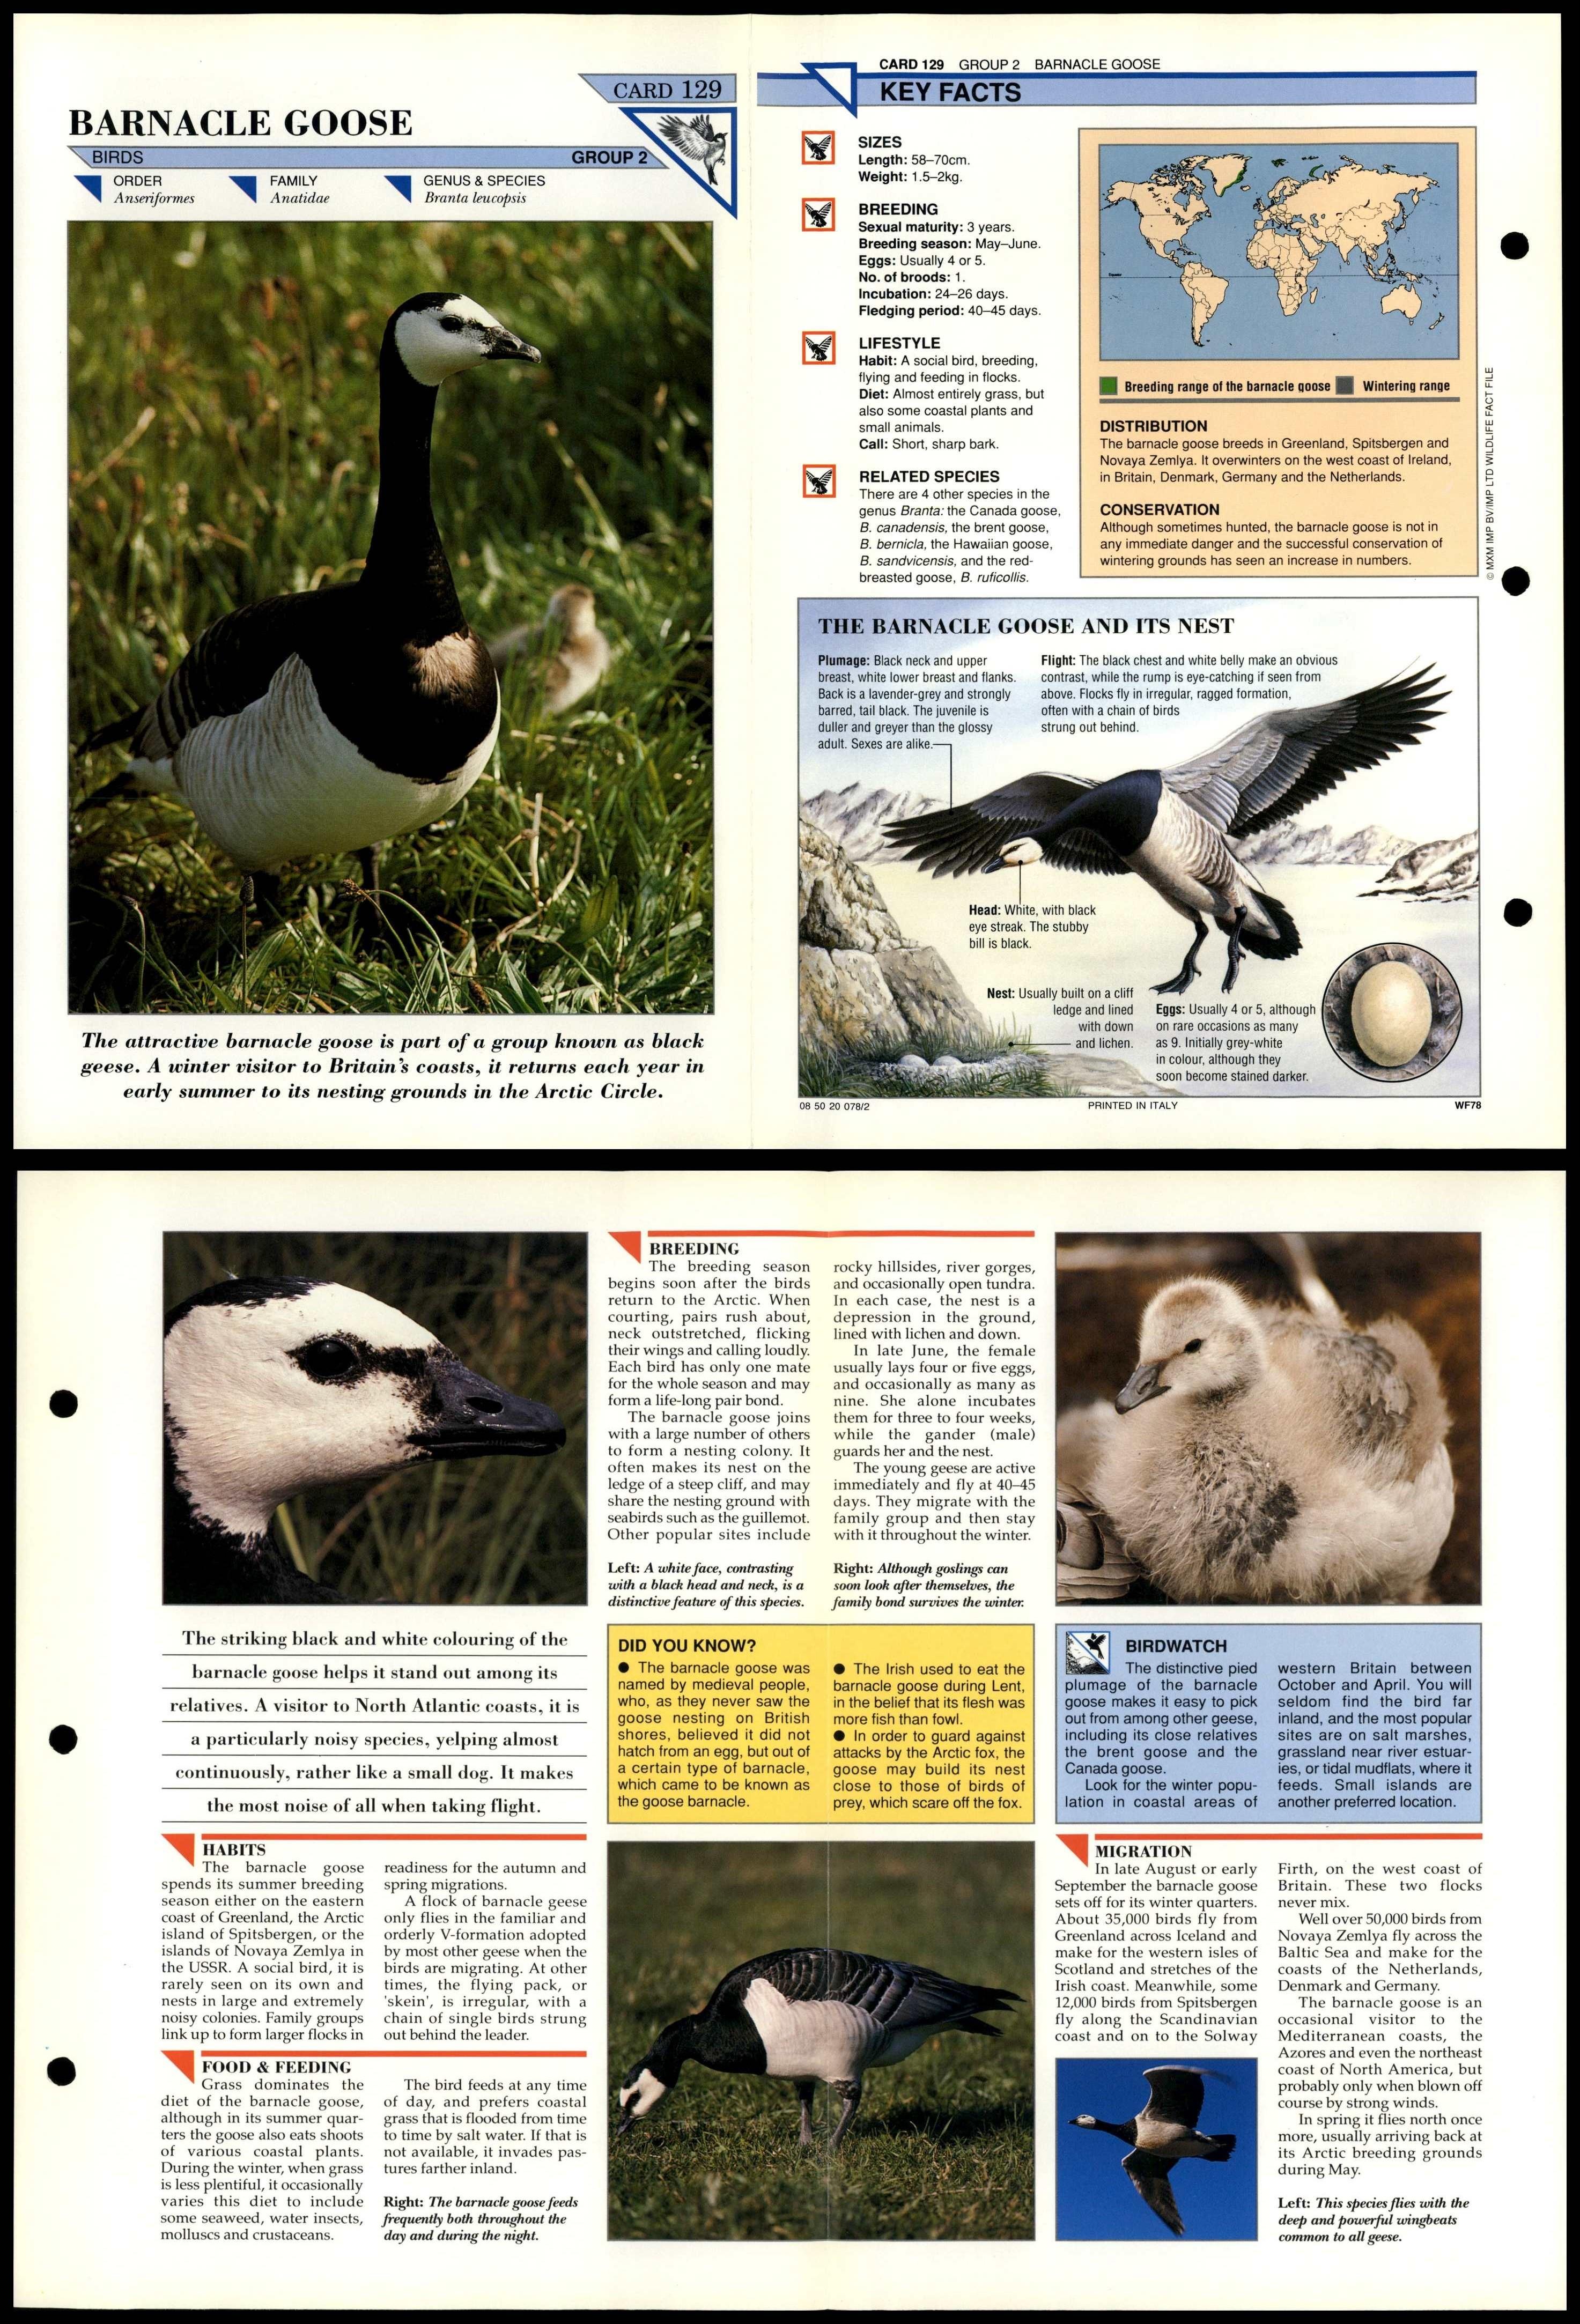 Barnacle Goose #129 Birds Wildlife Fact File Fold-Out Card